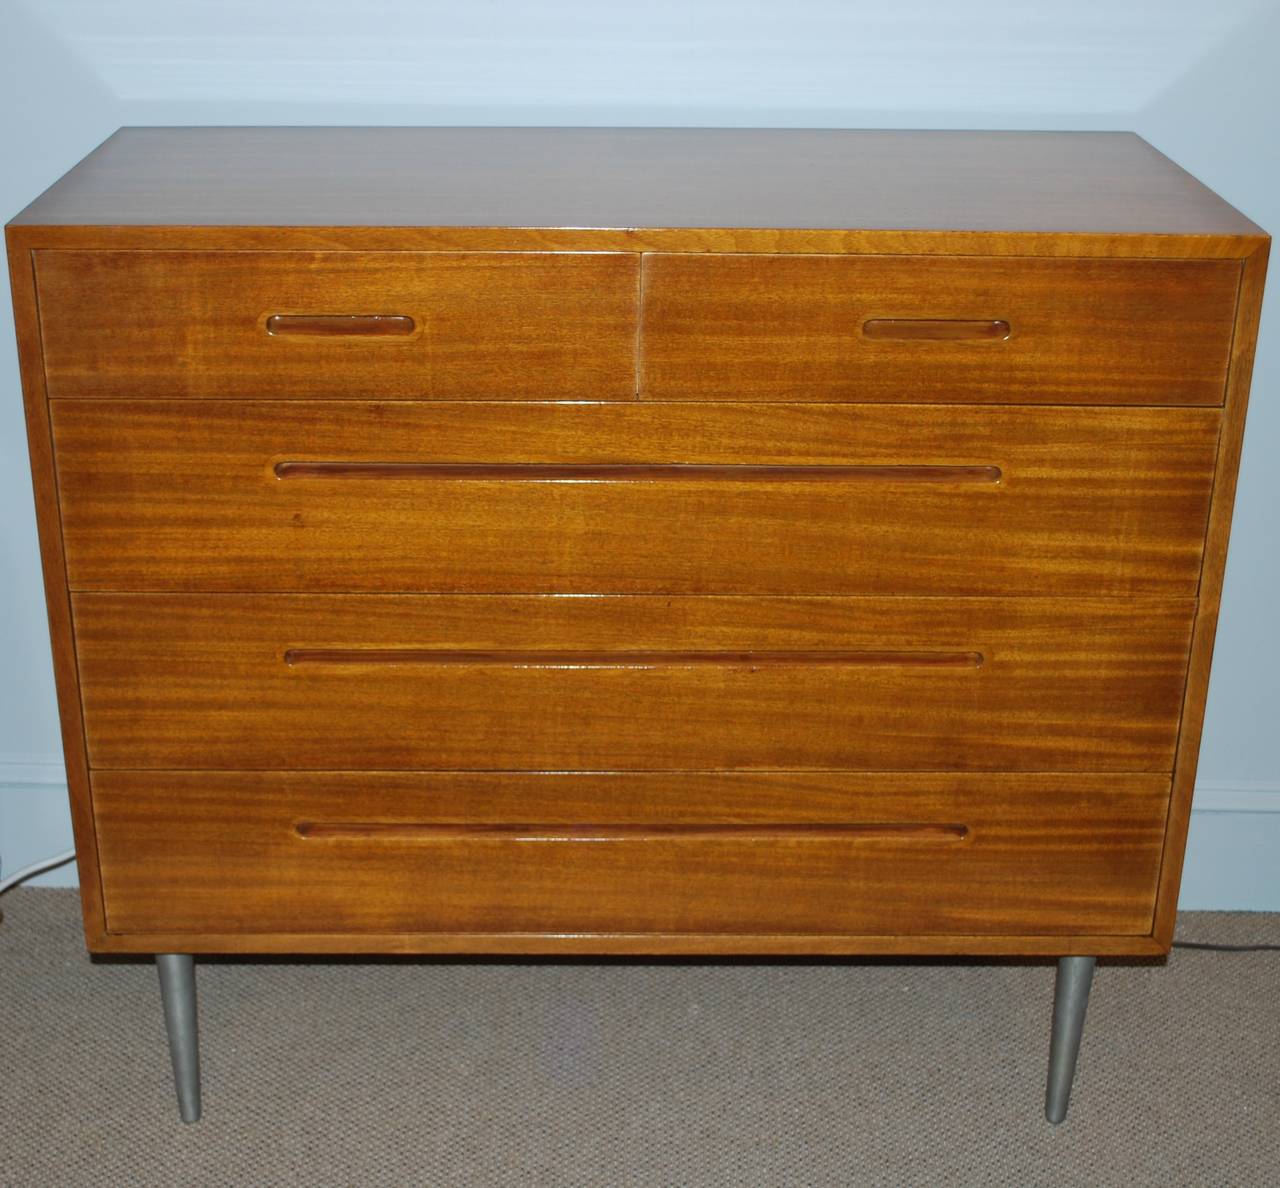 Newly restored, light mahogany chests, designed by Edward Wormley for Dunbar, special ordered on tall, tapered steel legs, purchased in 1950.
Original order, sales receipt and other documentation accompanying.